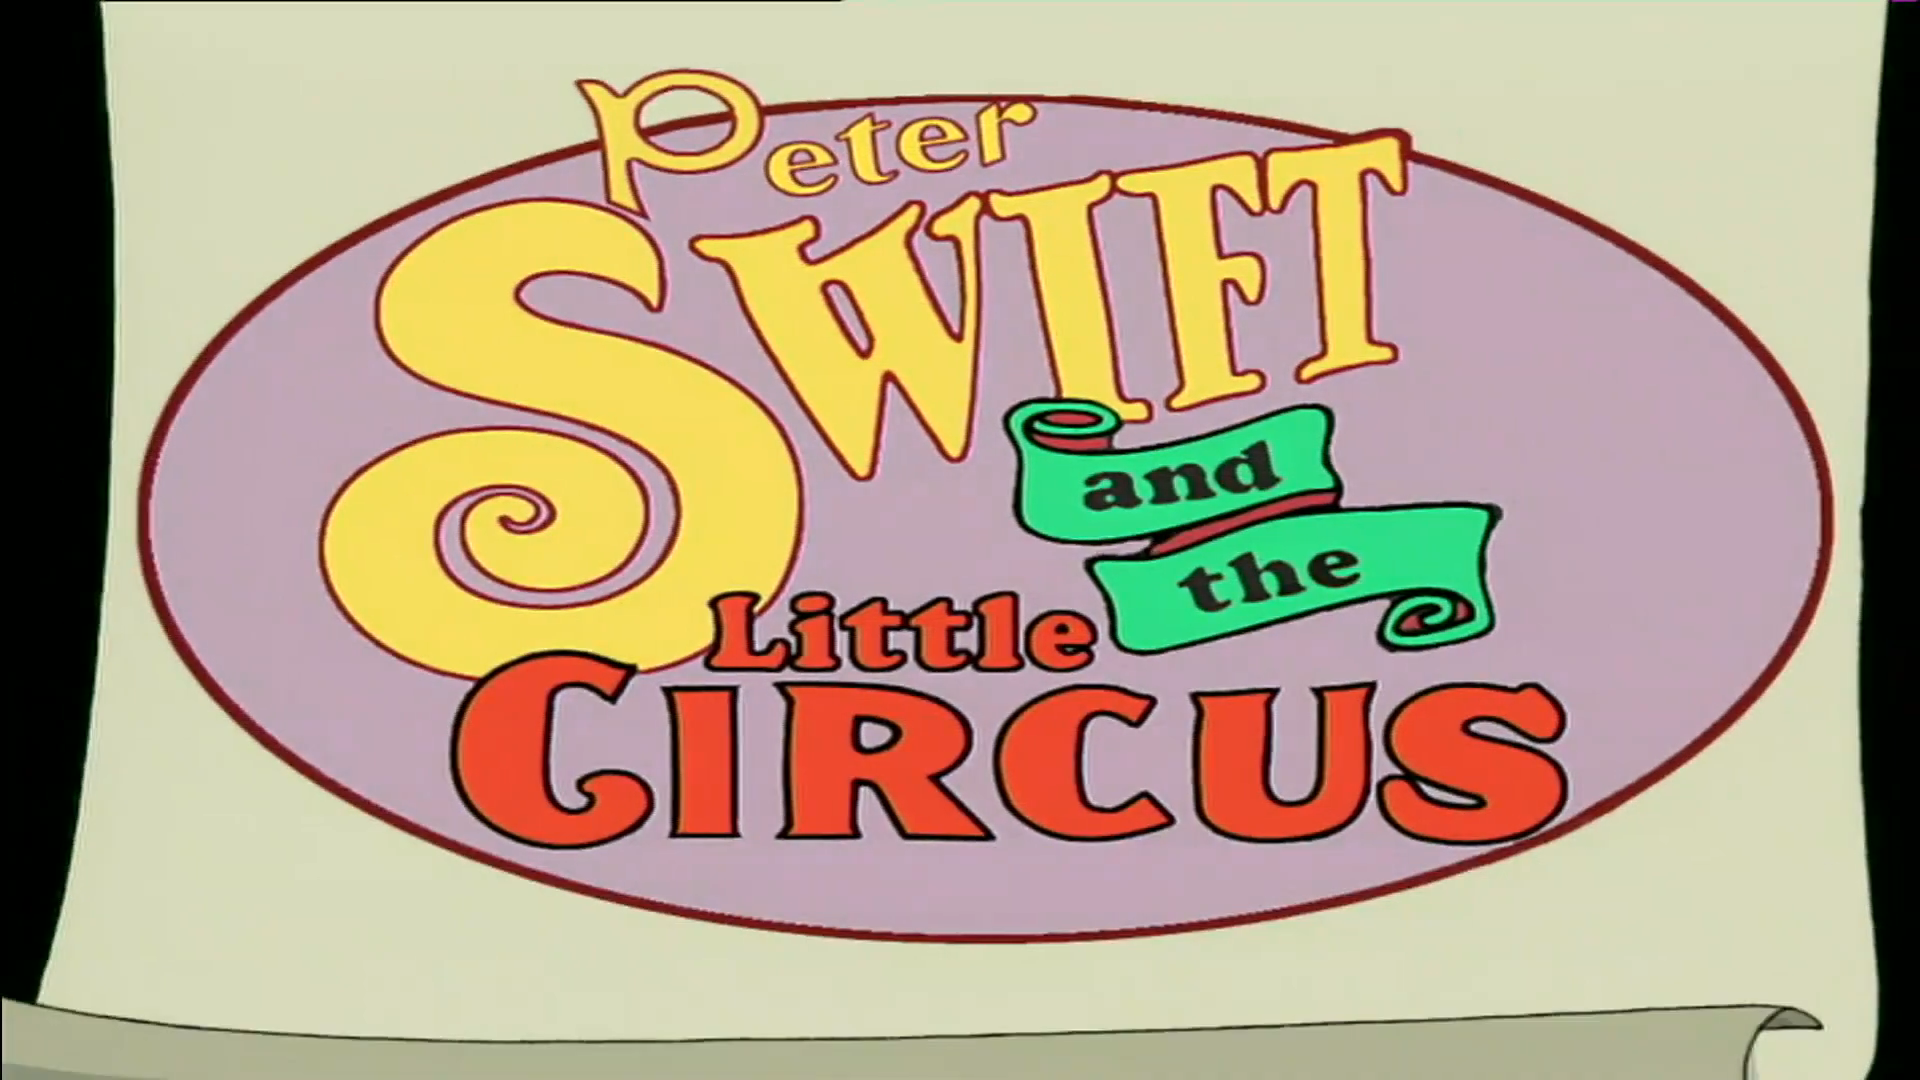 Peter Swift & the Little Circus logo.png